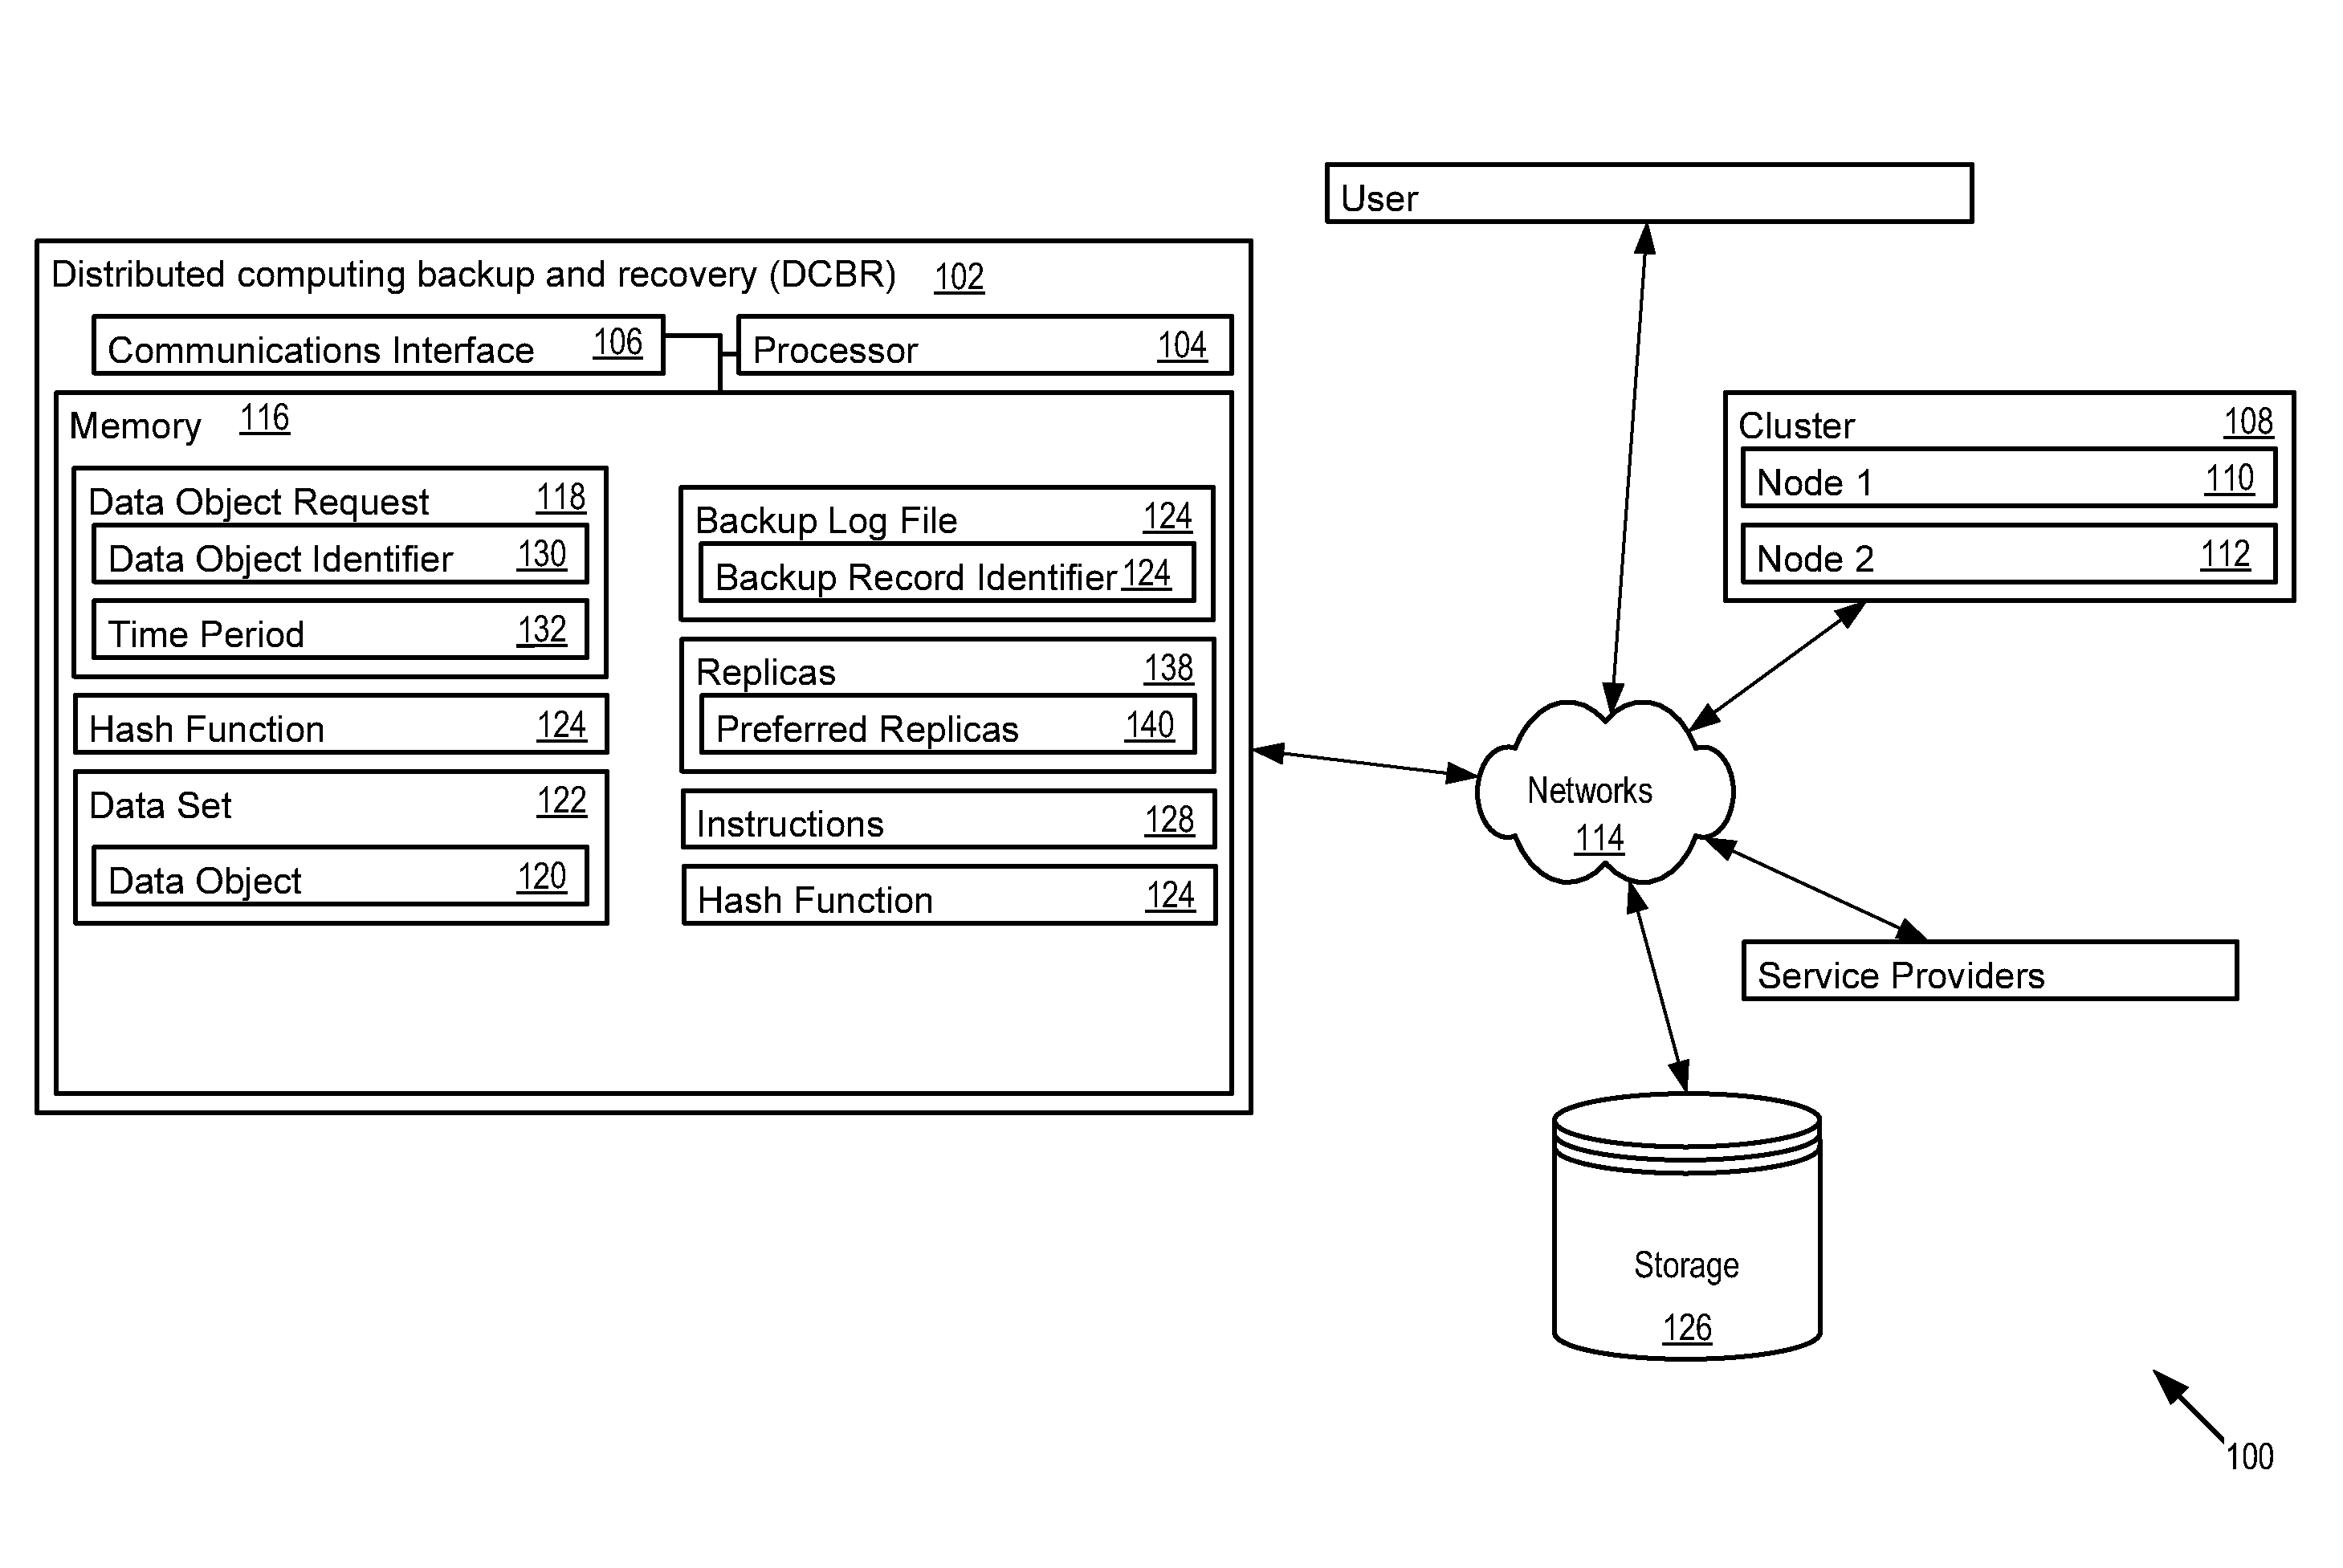 Distributed computing backup and recovery system